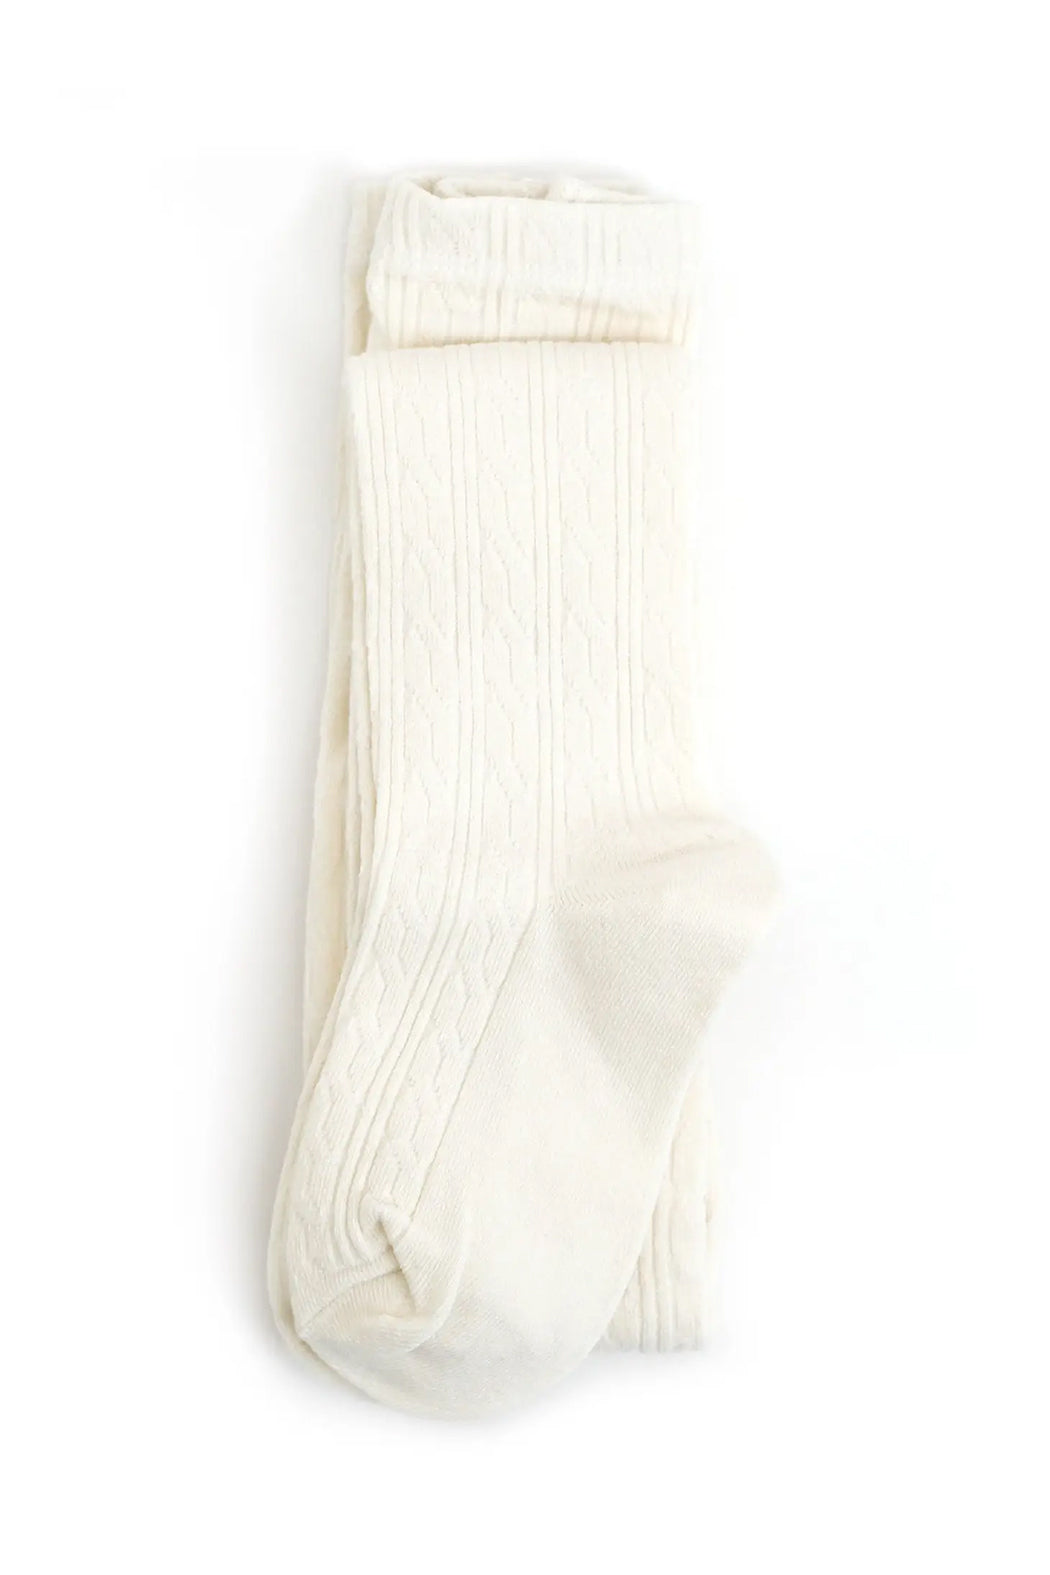 Little Stocking Co Ivory Cable Knit Tights